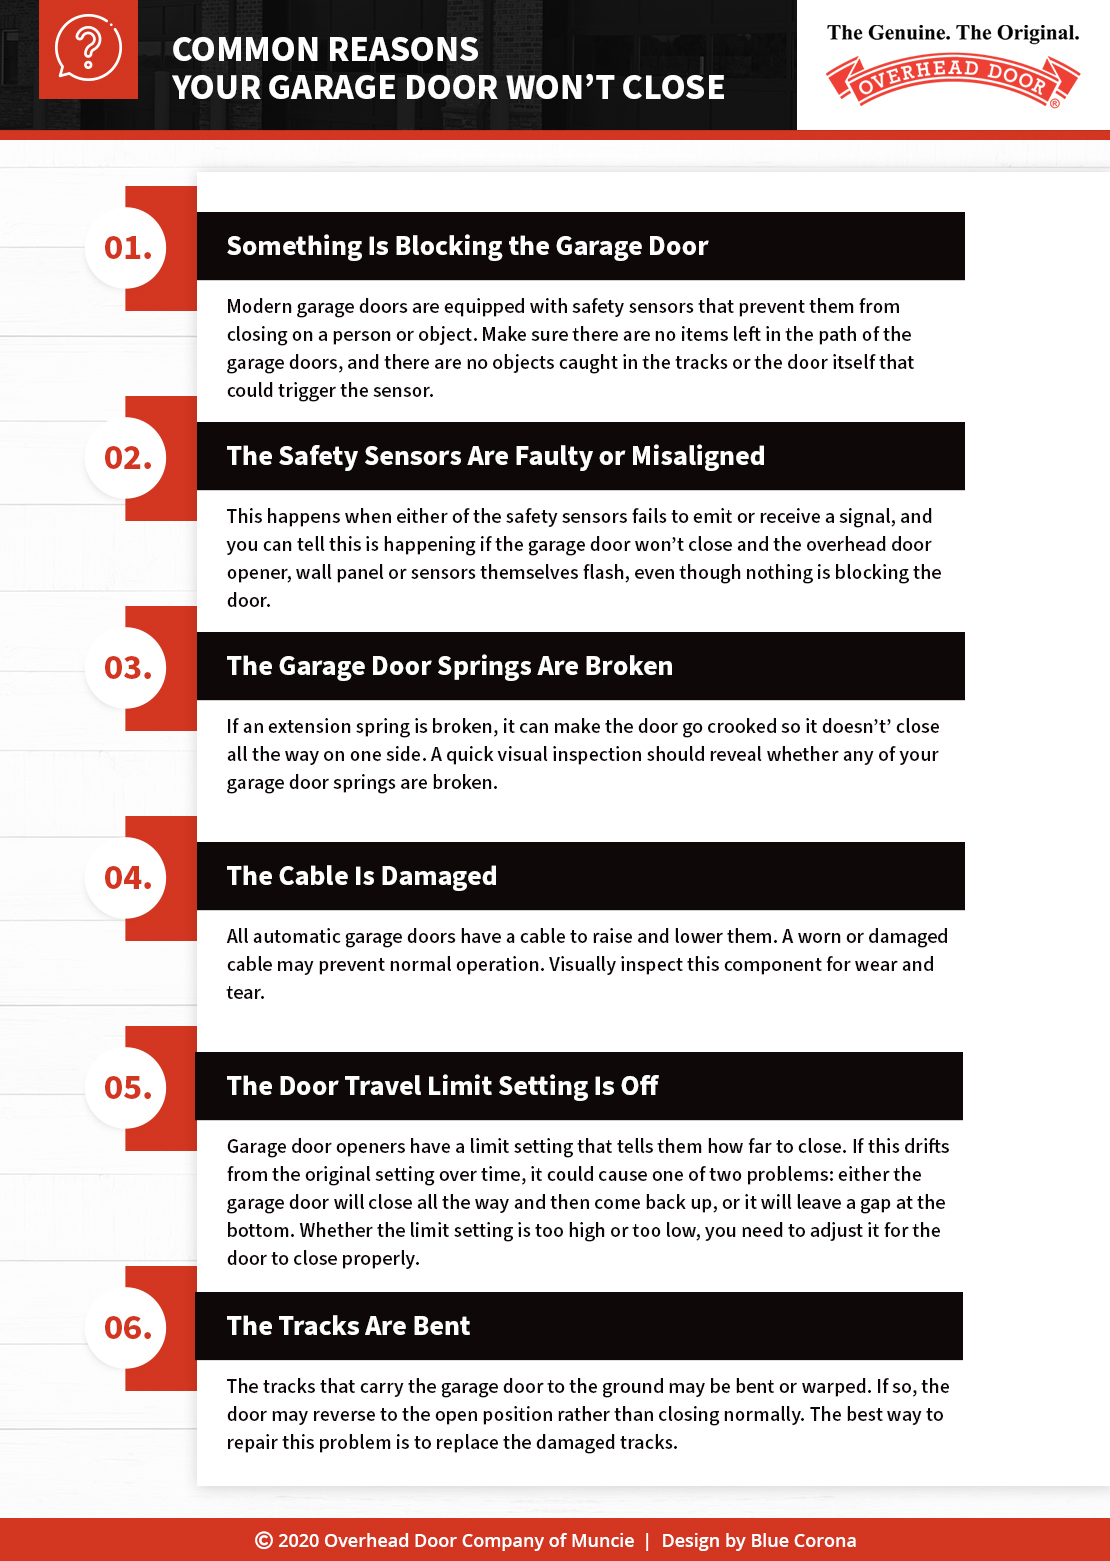 Infographic explaining top 6 reasons your garage door might not be closing.